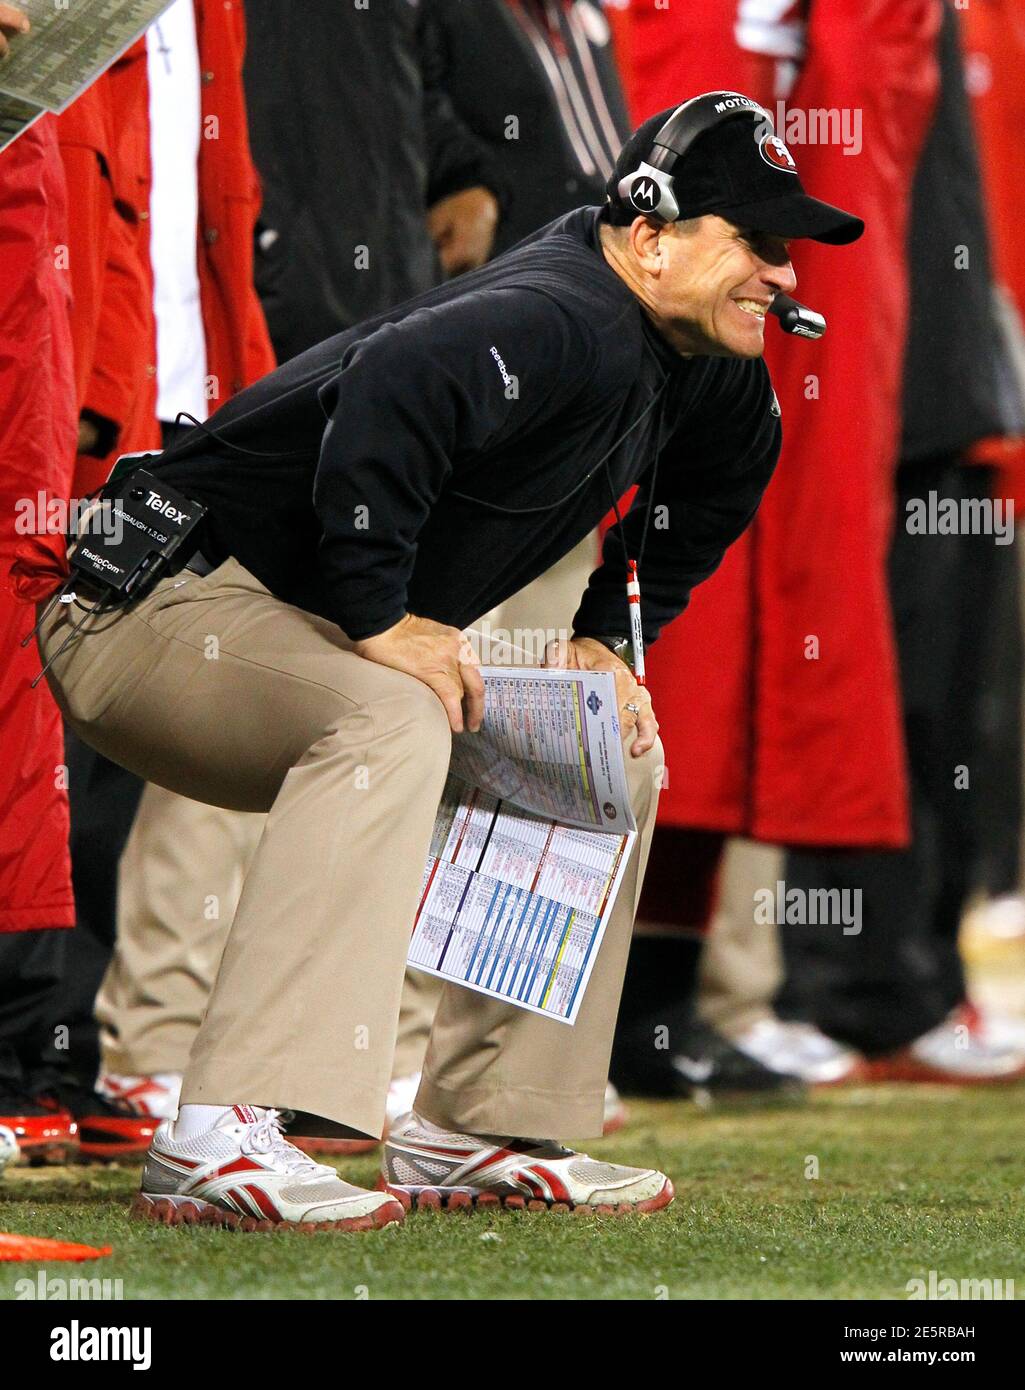 San Francisco 49ers head coach Jim Harbough reacts to a play against the New York Giants during the NFL NFC Championship game in San Francisco, California, January 22, 2012. REUTERS/Mike Blake (UNITED STATES  - Tags: SPORT FOOTBALL) Stock Photo